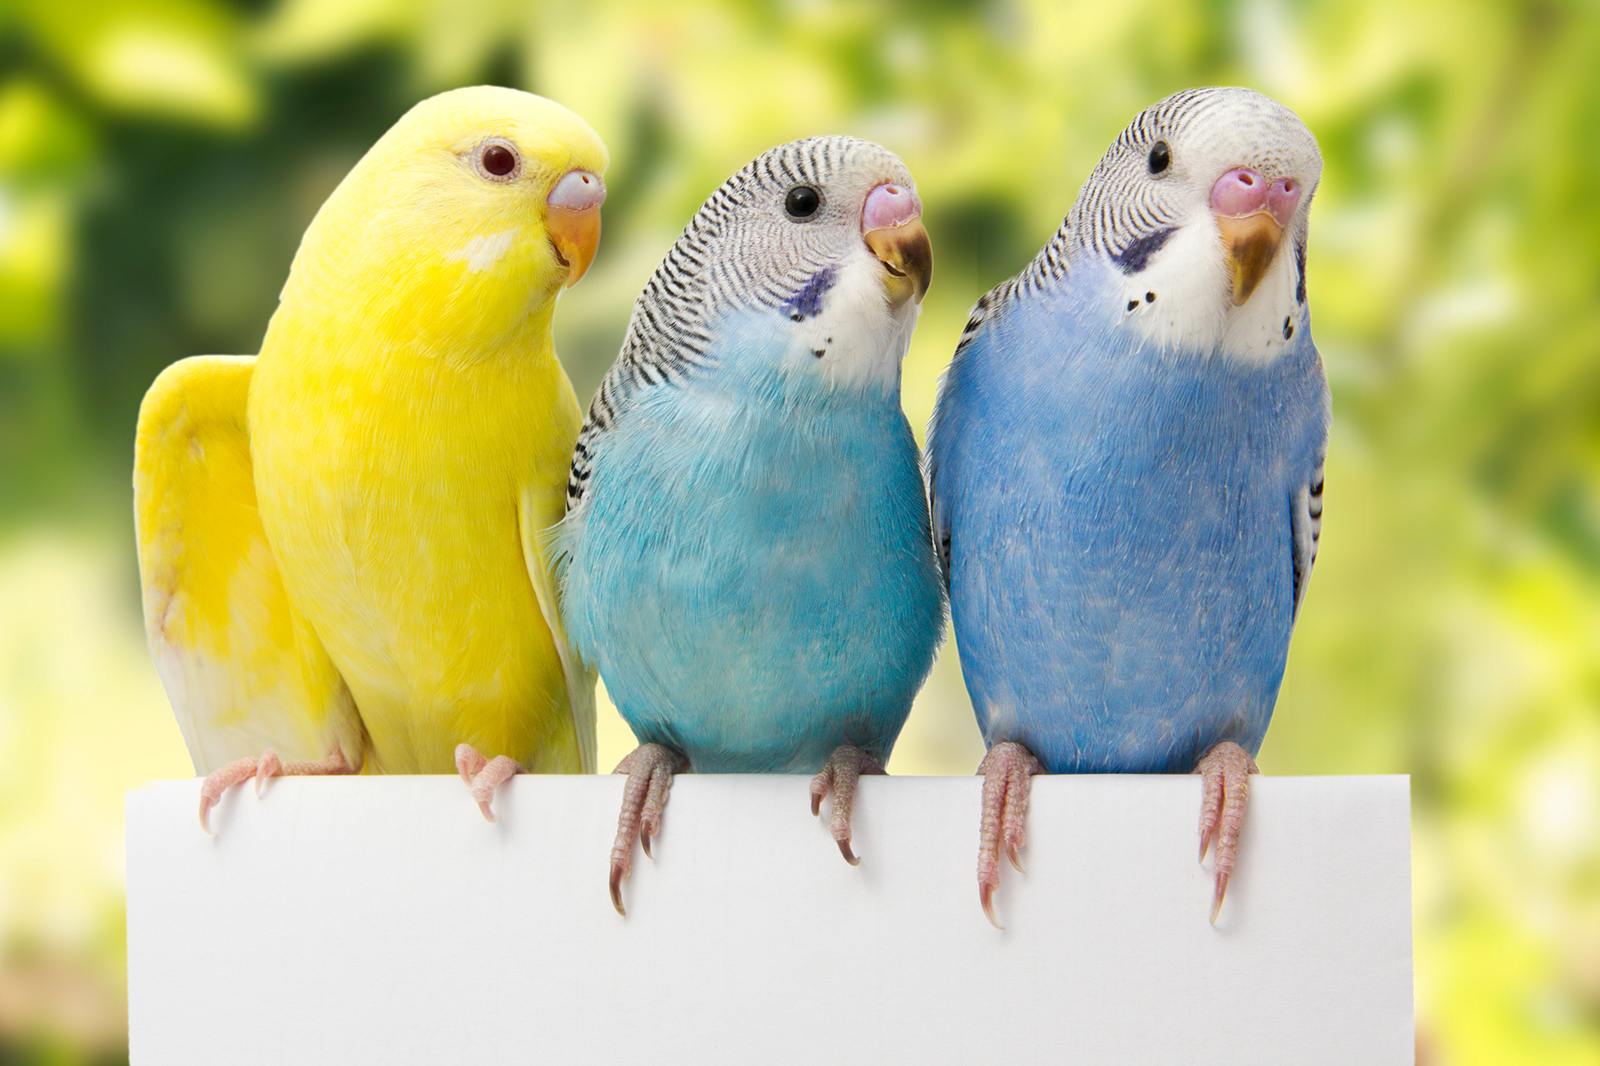 The Ancient Tradition Of Keeping Birds As Pets (Part 2)